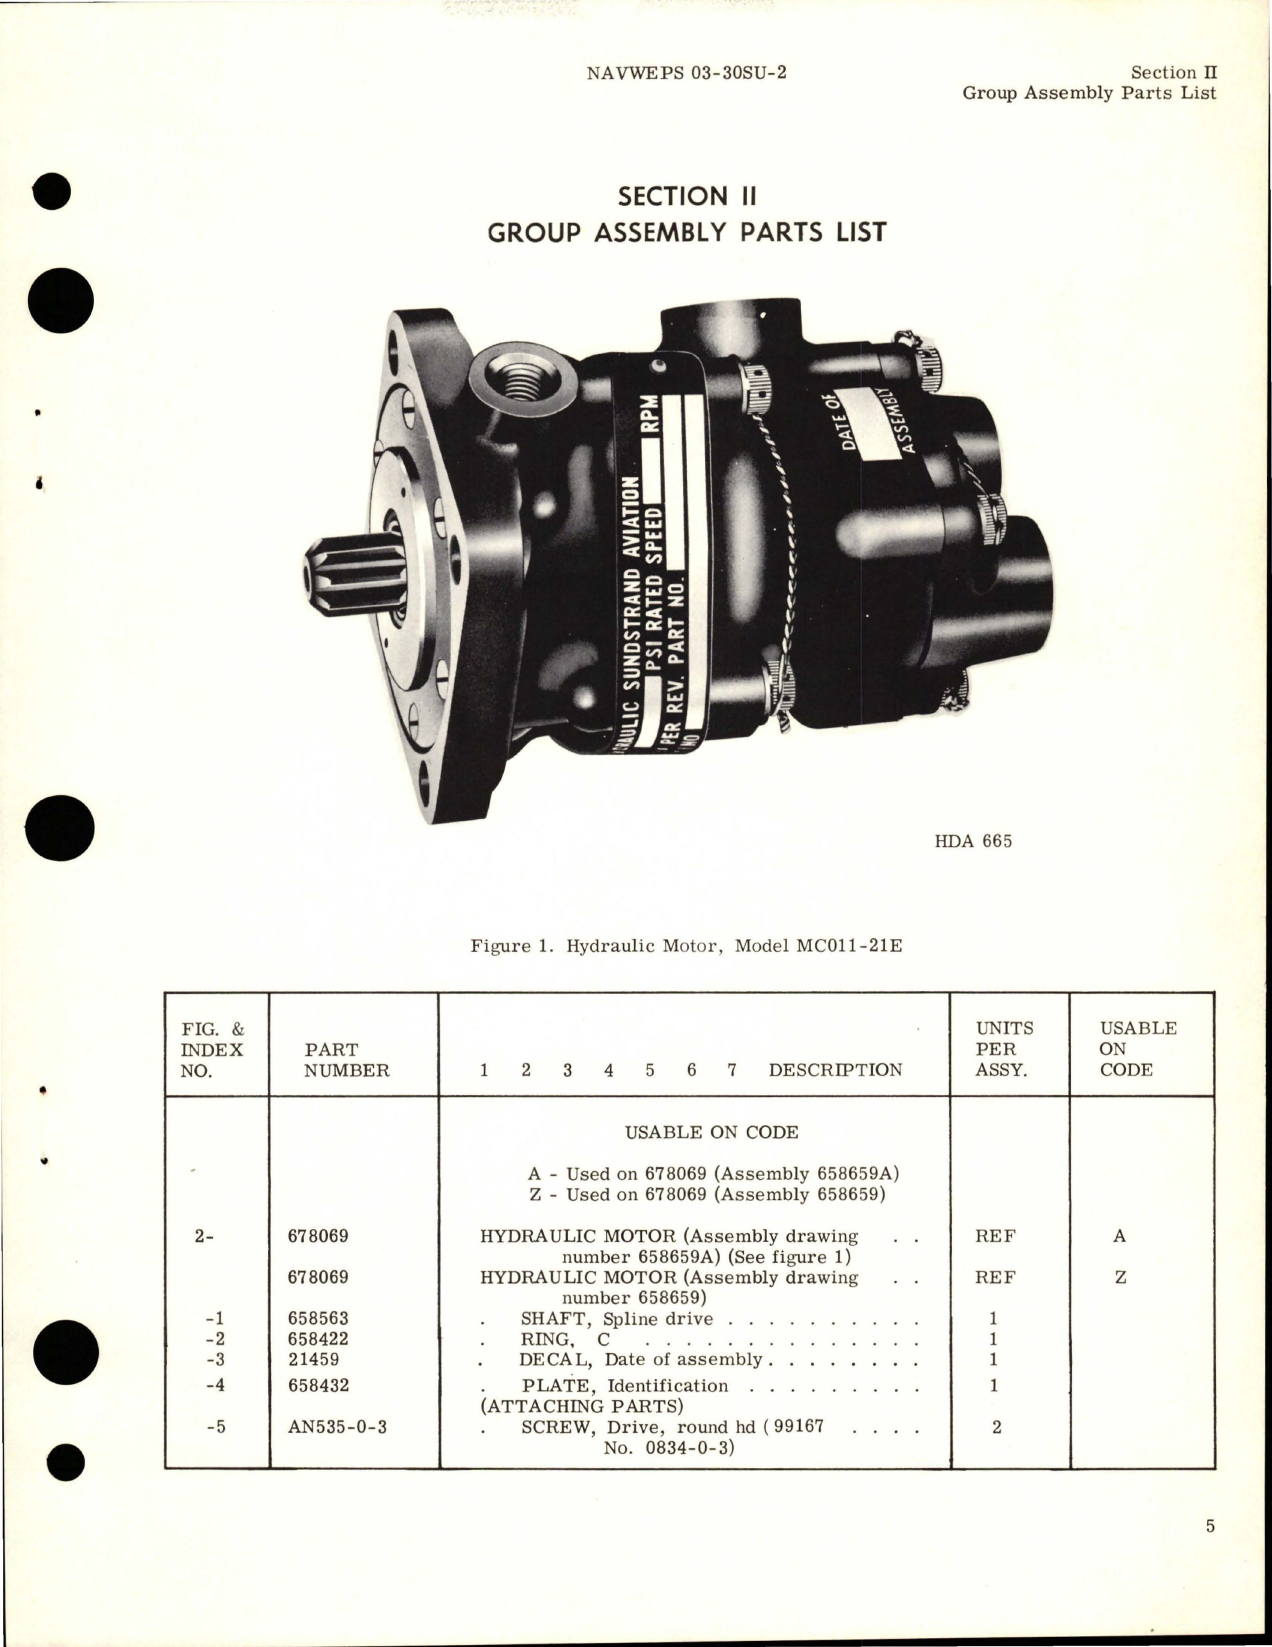 Sample page 7 from AirCorps Library document: Illustrated Parts Breakdown for Hydraulic Motor - Model MC011-21E - Part 678069